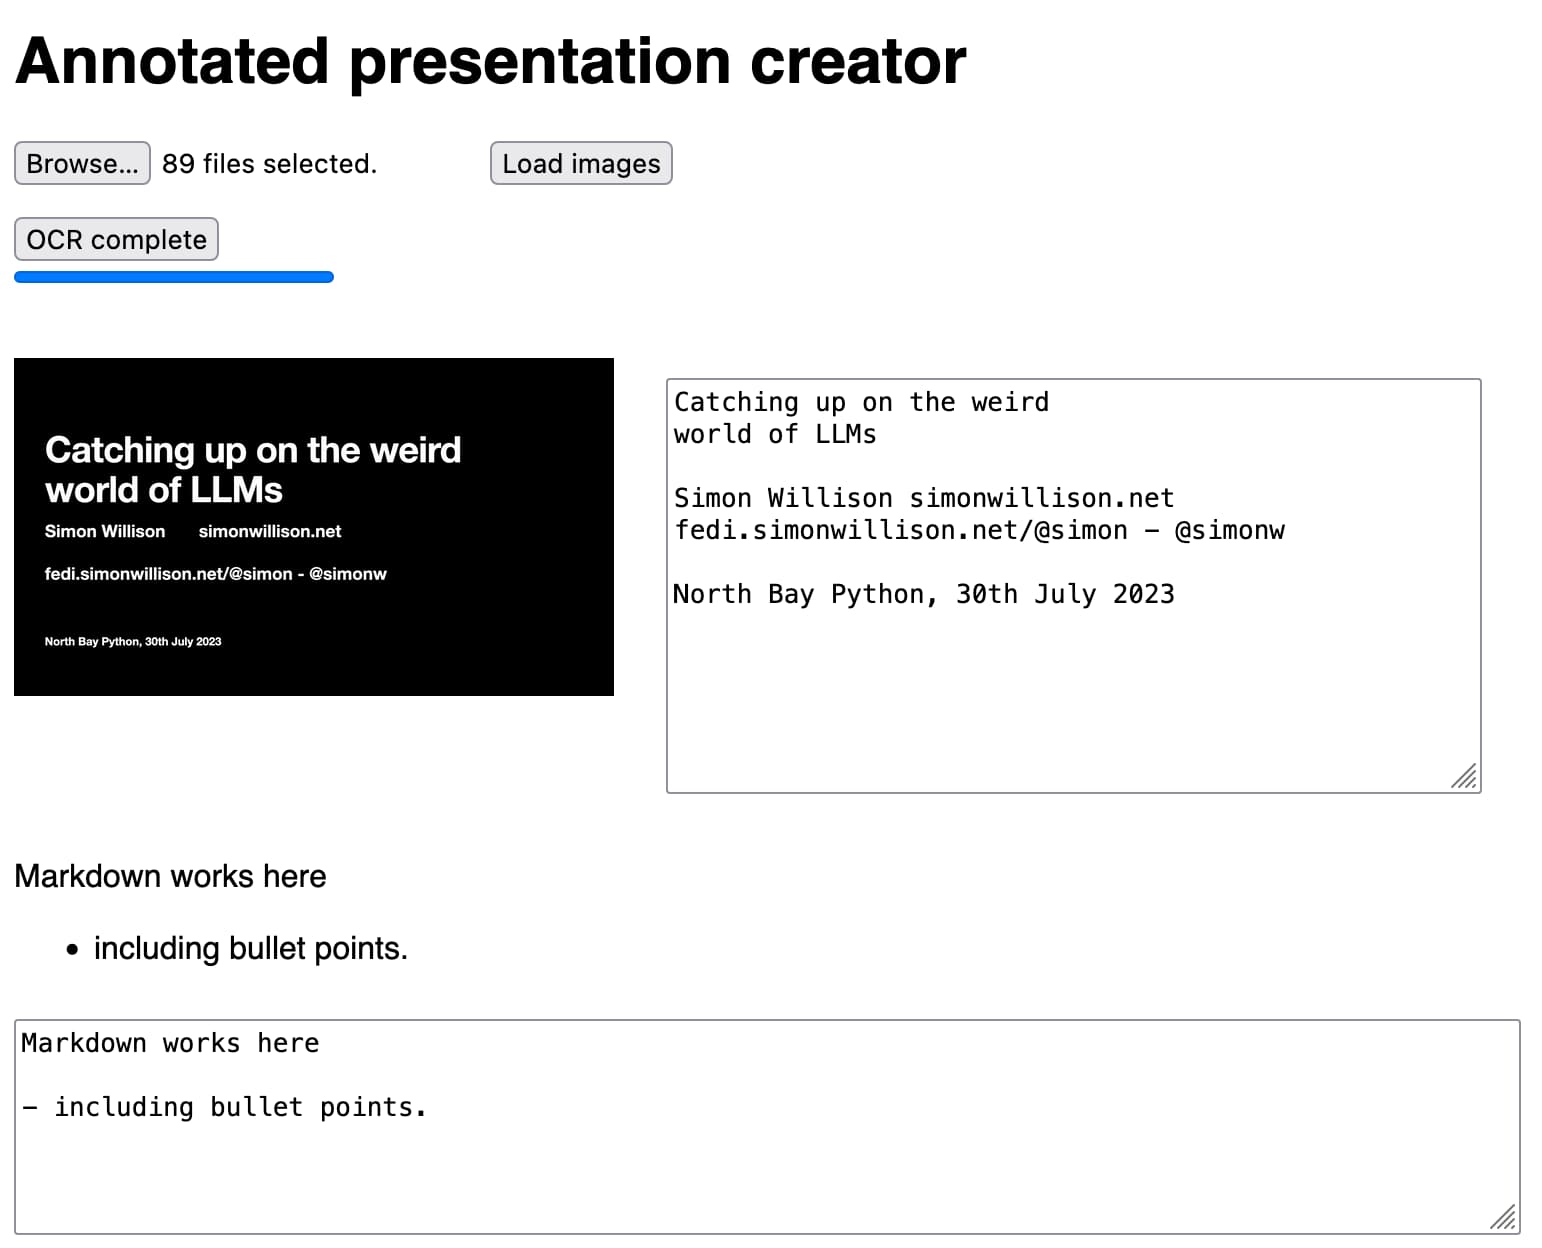 Visit How I make annotated presentations